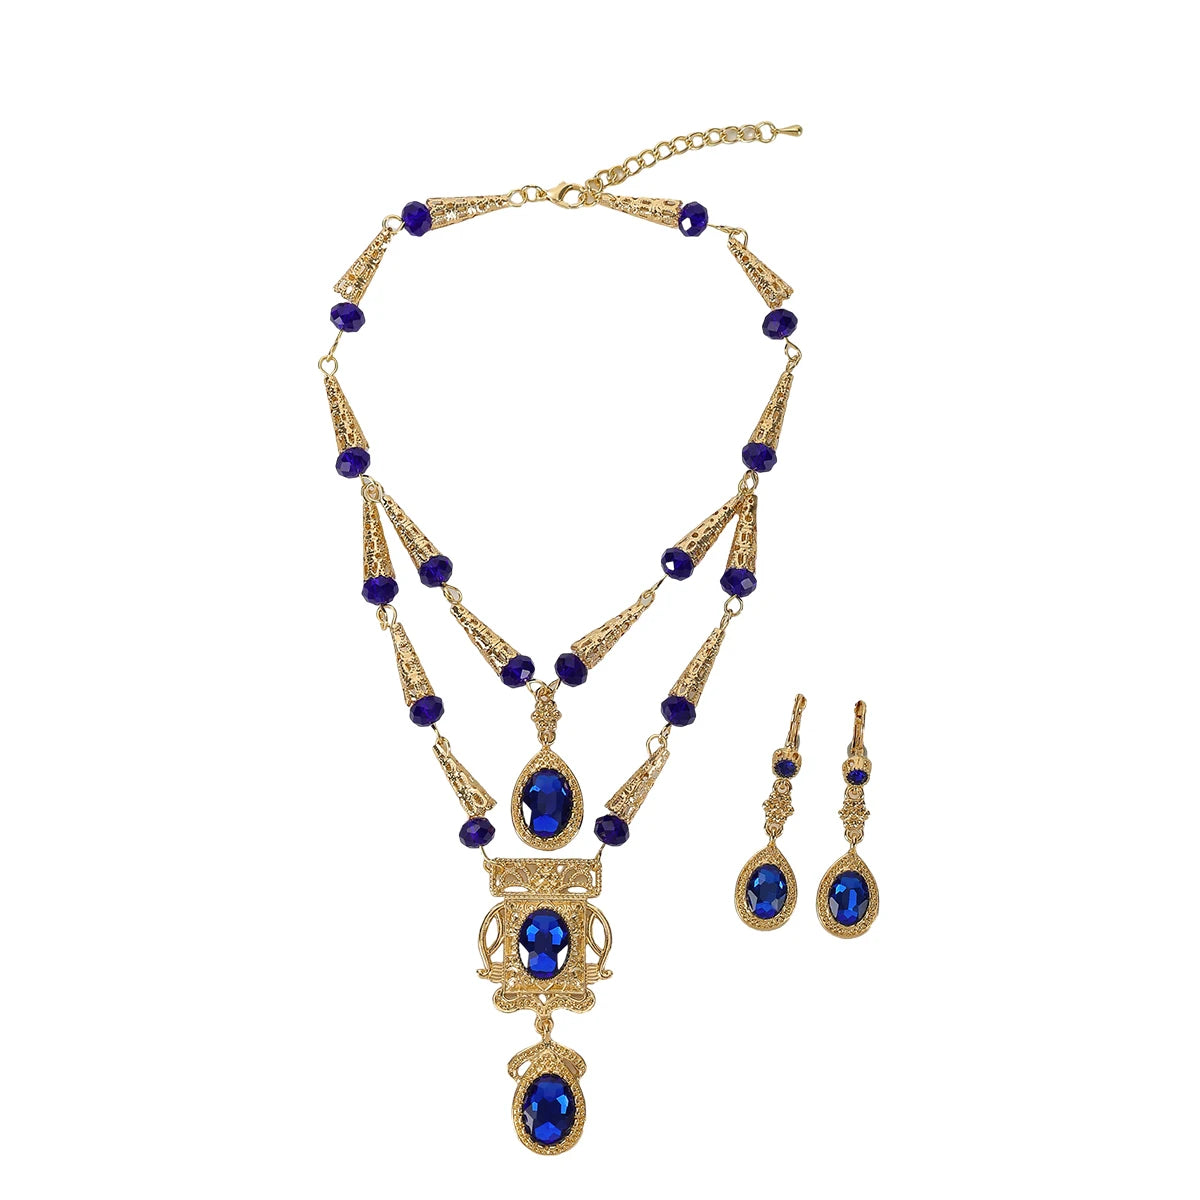 Moroccan Wedding Dress Jewelry Handmade Red Blue Gemstone Necklace Earrings Gold-Plated Kaftan Bridal Accessories - Hiron Store